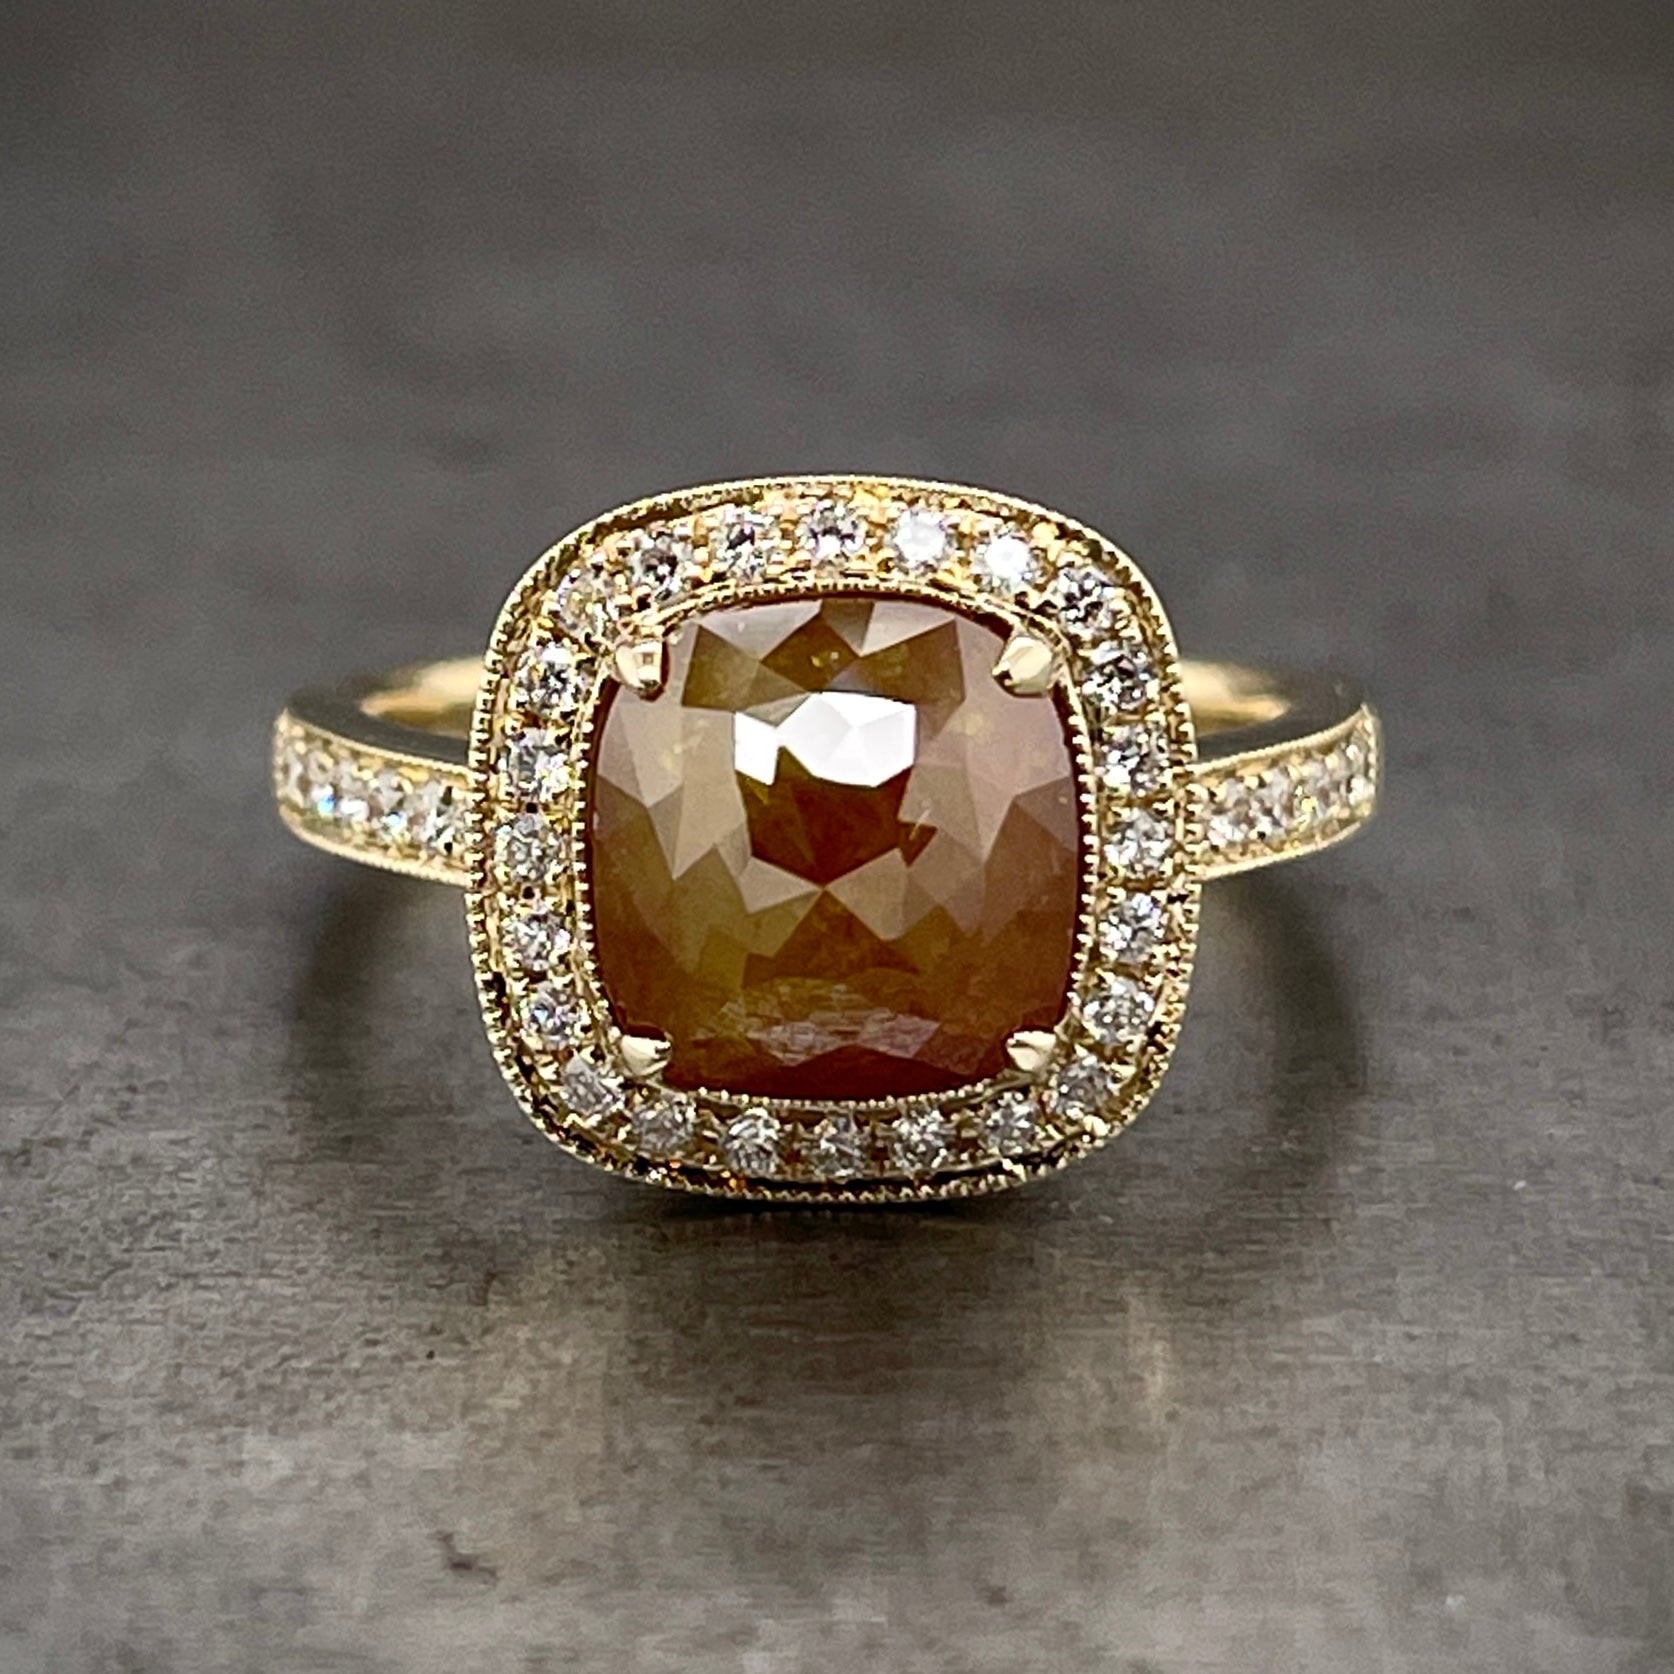 Frontal view of rose cut red-brown diamond ring. A square shaped rose cut diamond (with red, brown and yellow coloring) is four prong set in yellow gold. There is a halo of round brilliant diamonds that surrounds the rose cut diamond. There are round brilliant diamonds prong set on the shoulders of the shank. There is milgraine detailing around all the edges of the ring.